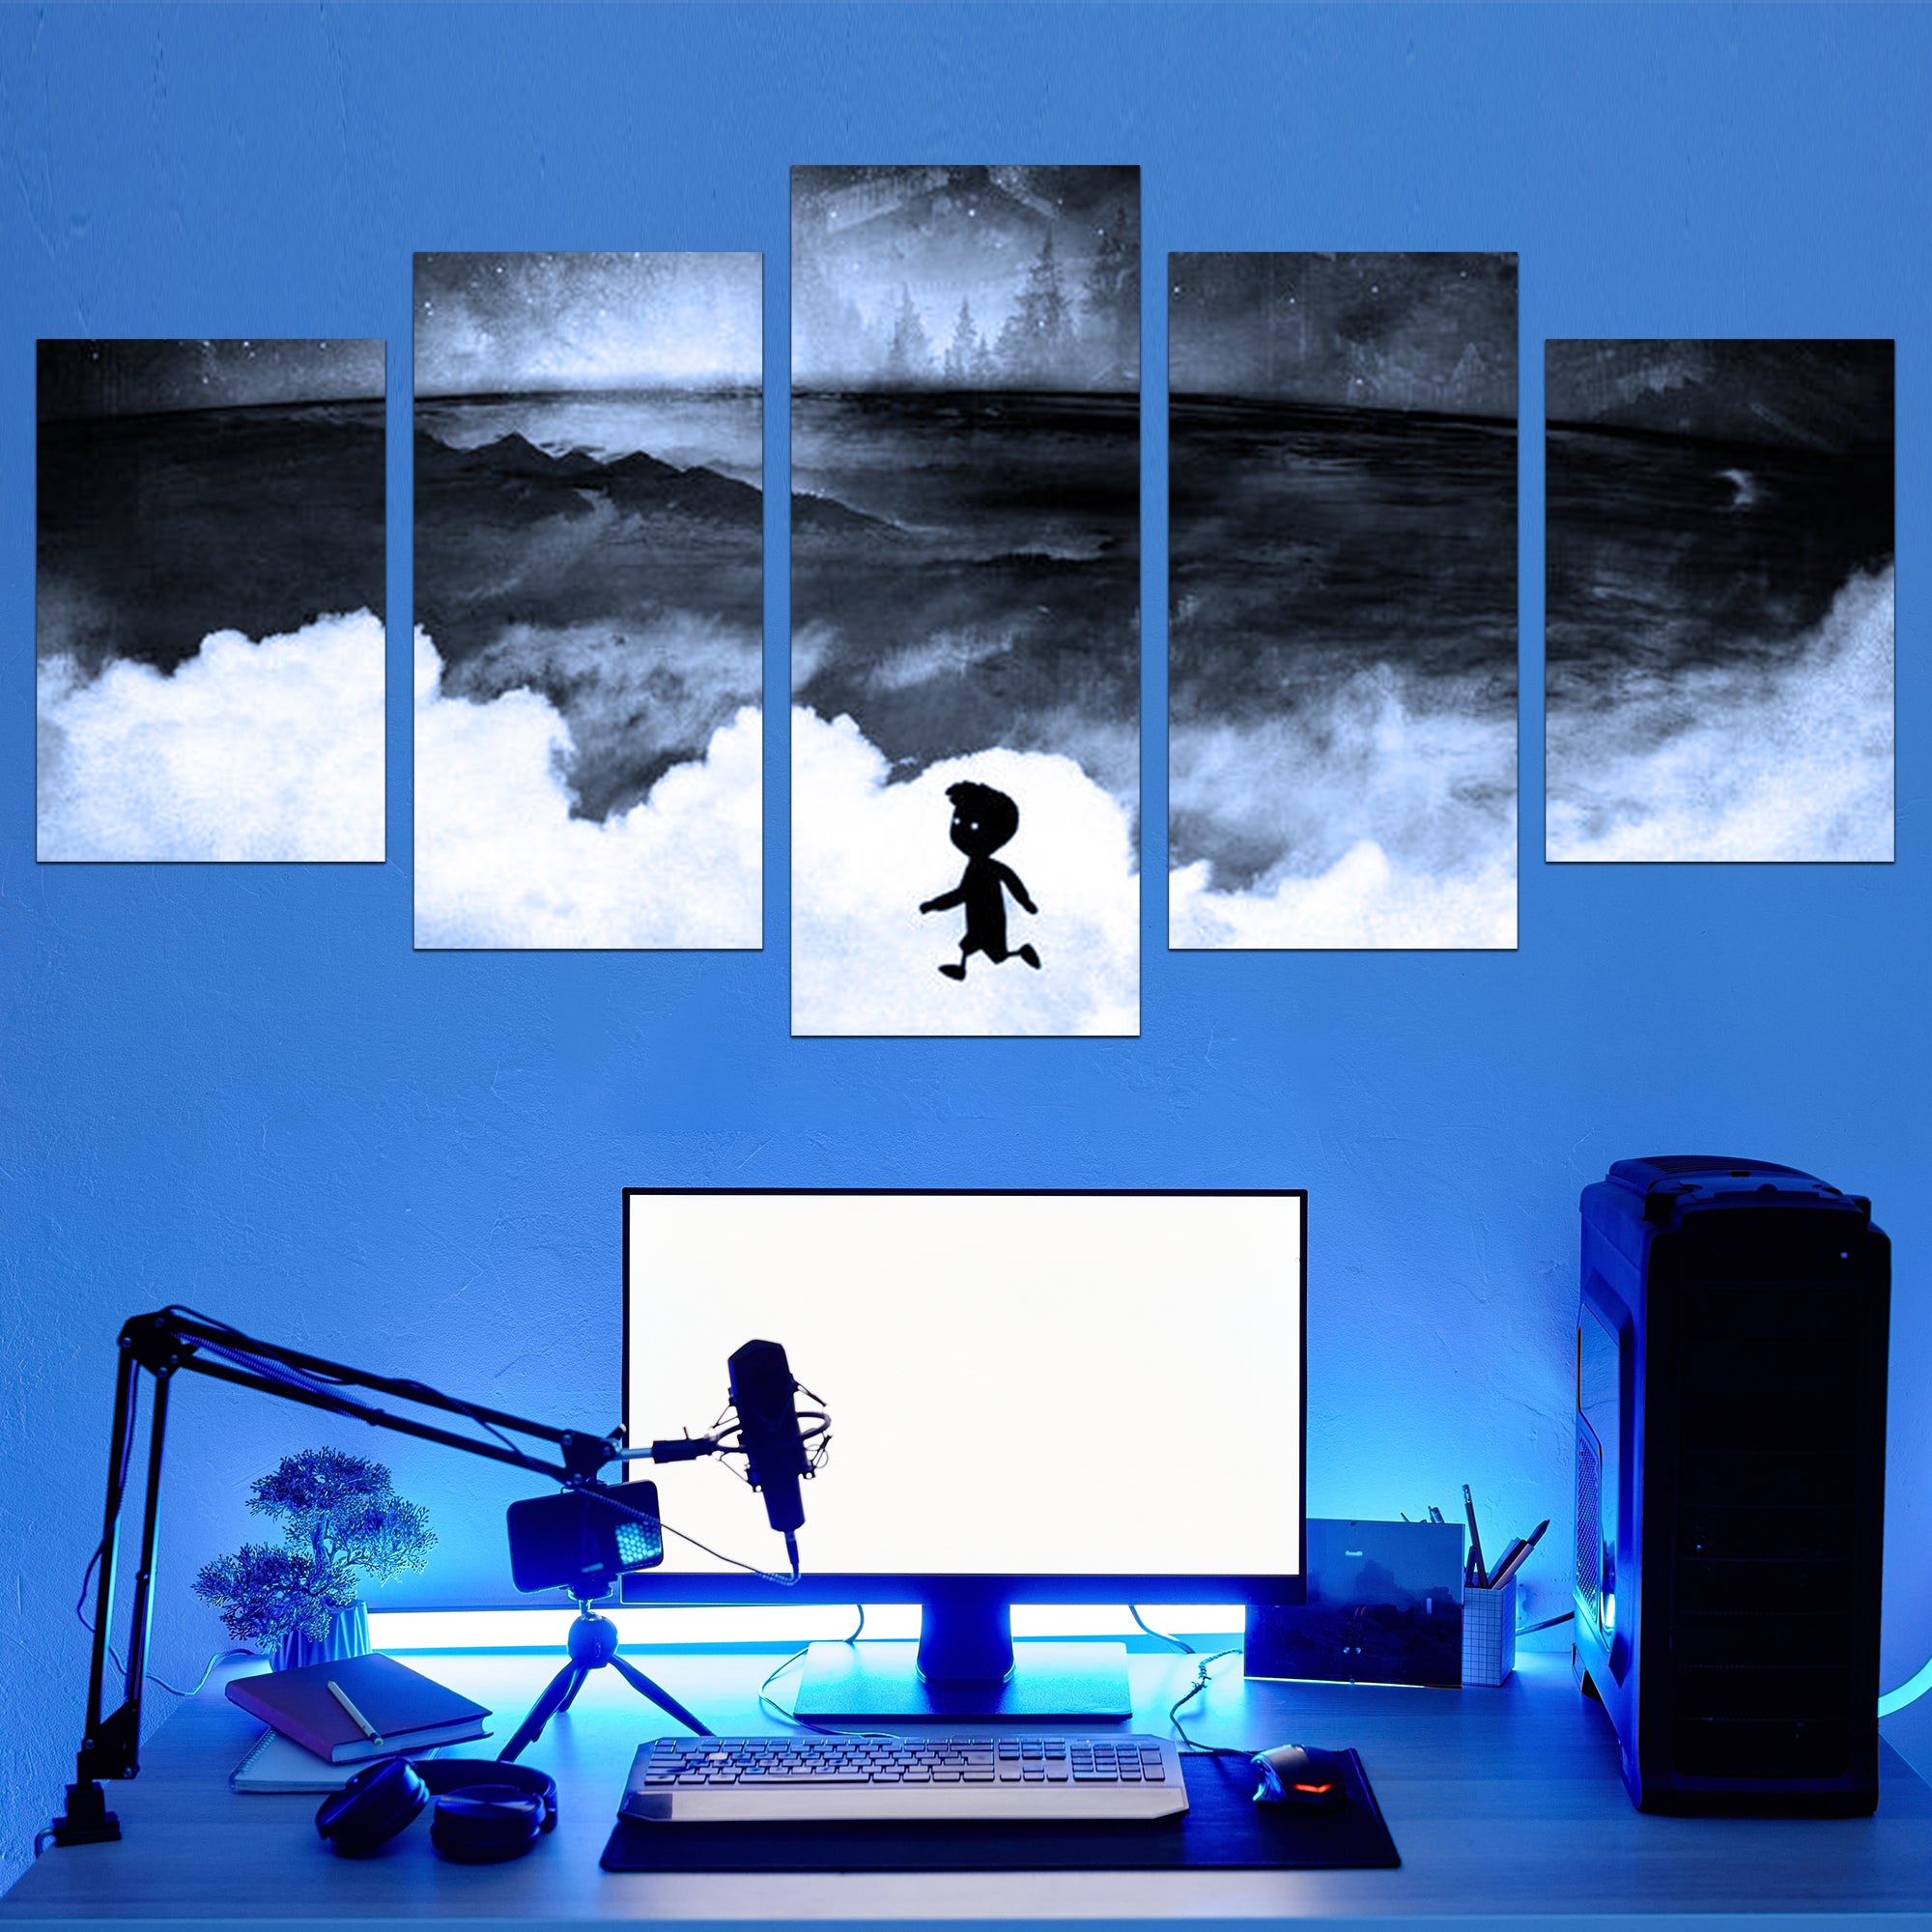 Beyond Shadows: Limbo-Inspired Wall Canvas Art Redefined